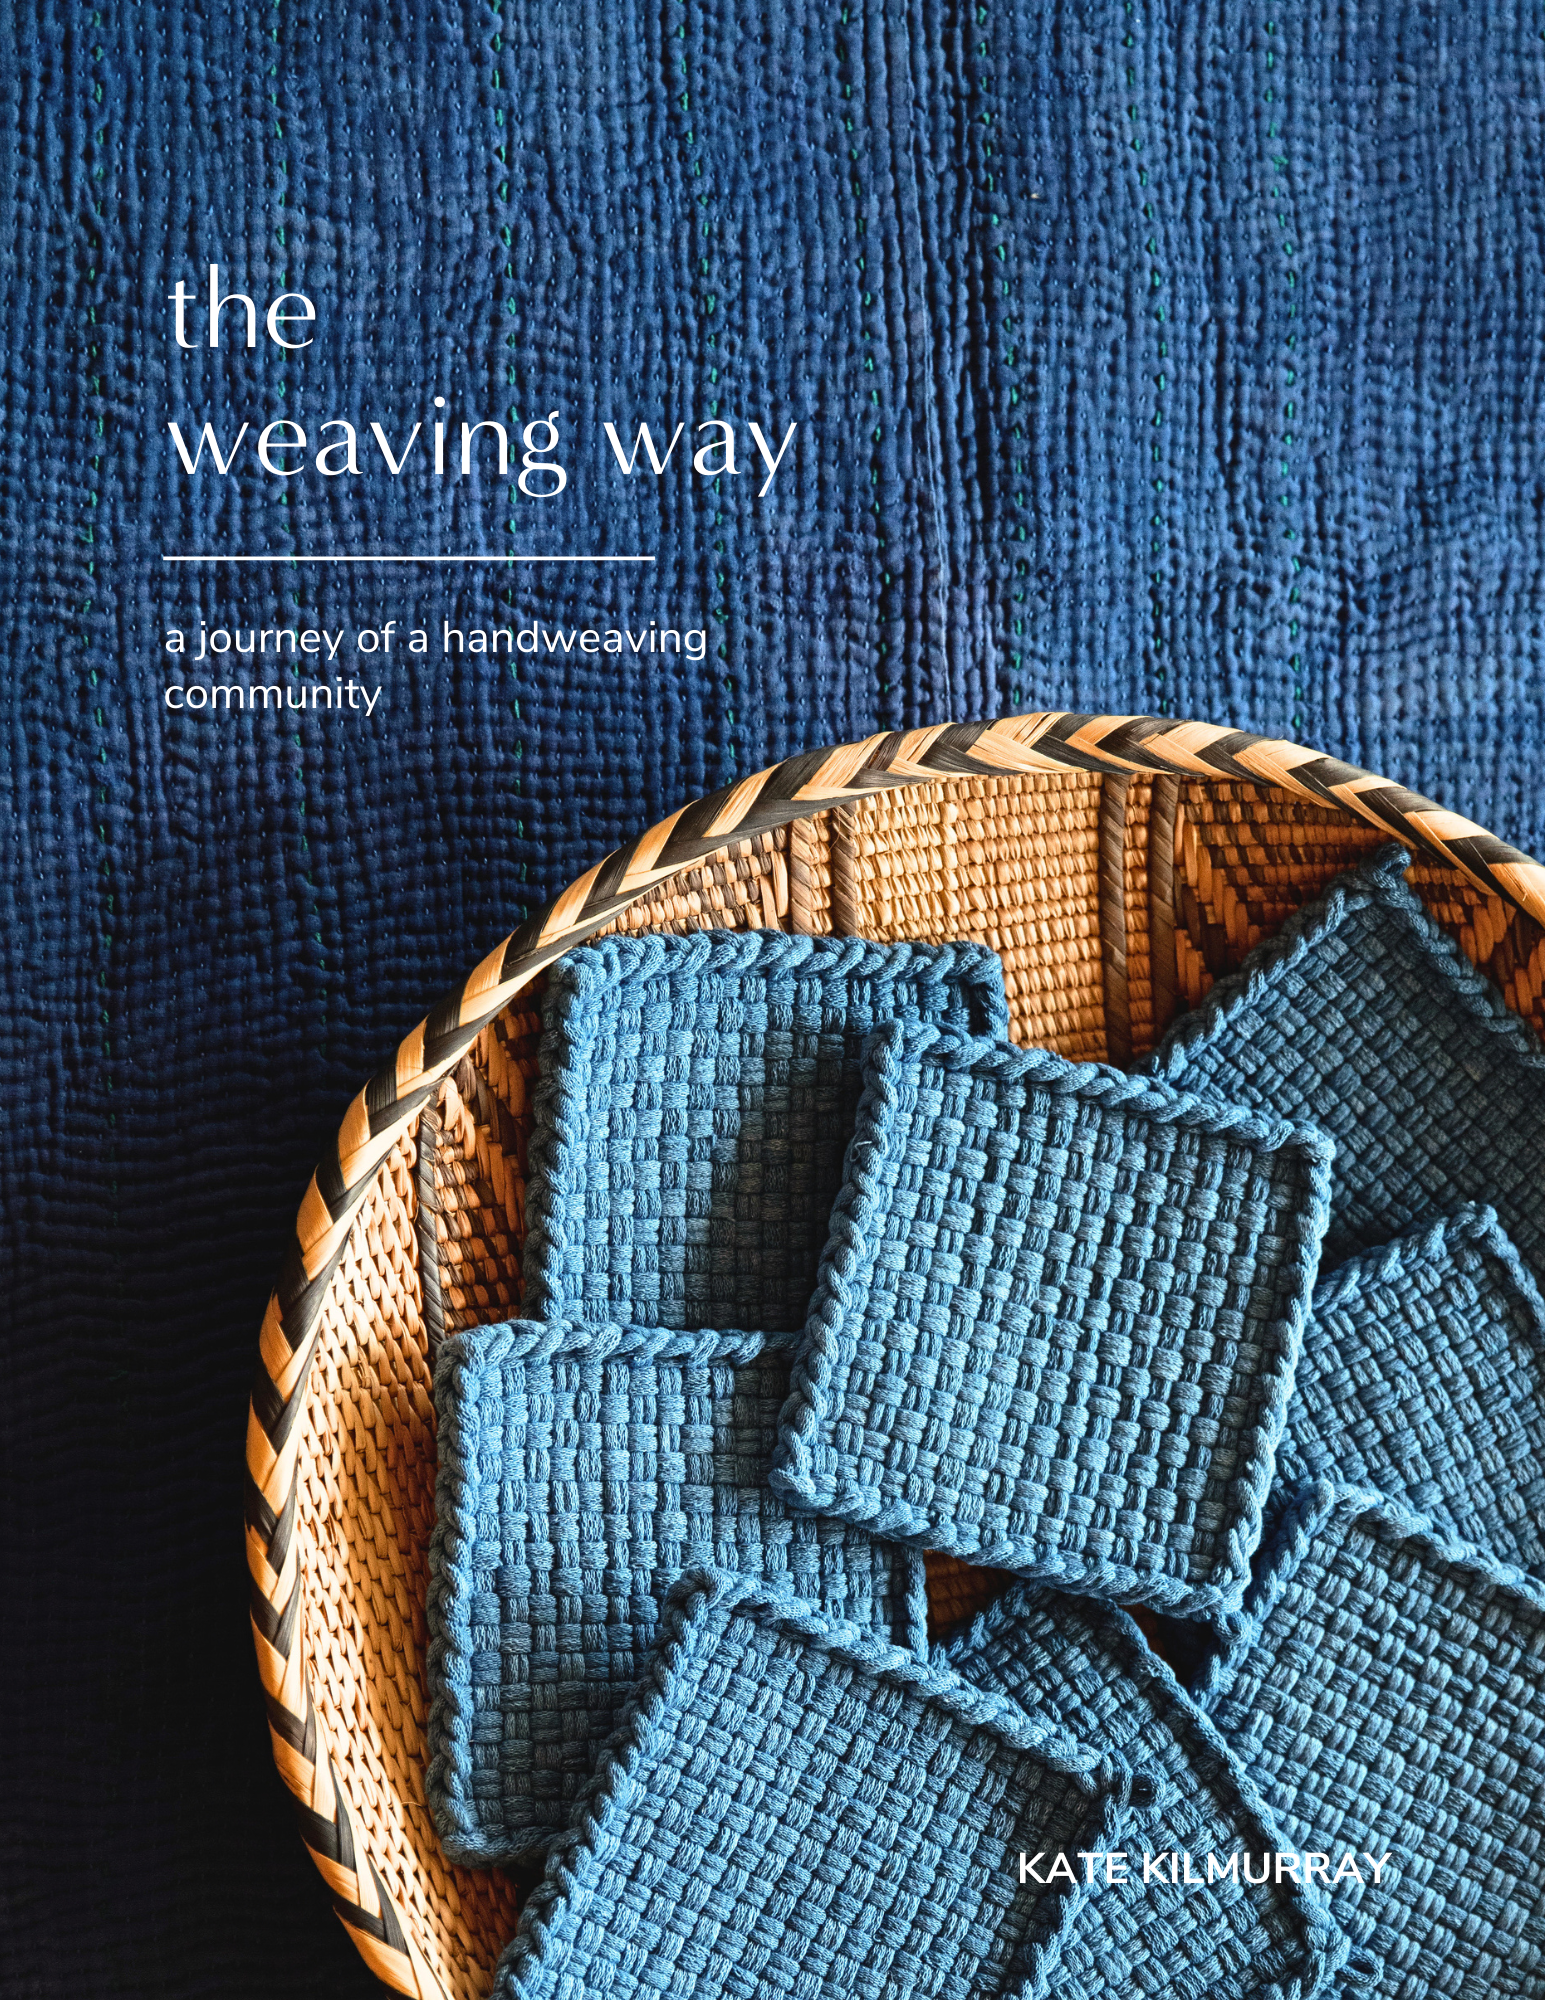 The Weaving Way - a journey of a handweaving community